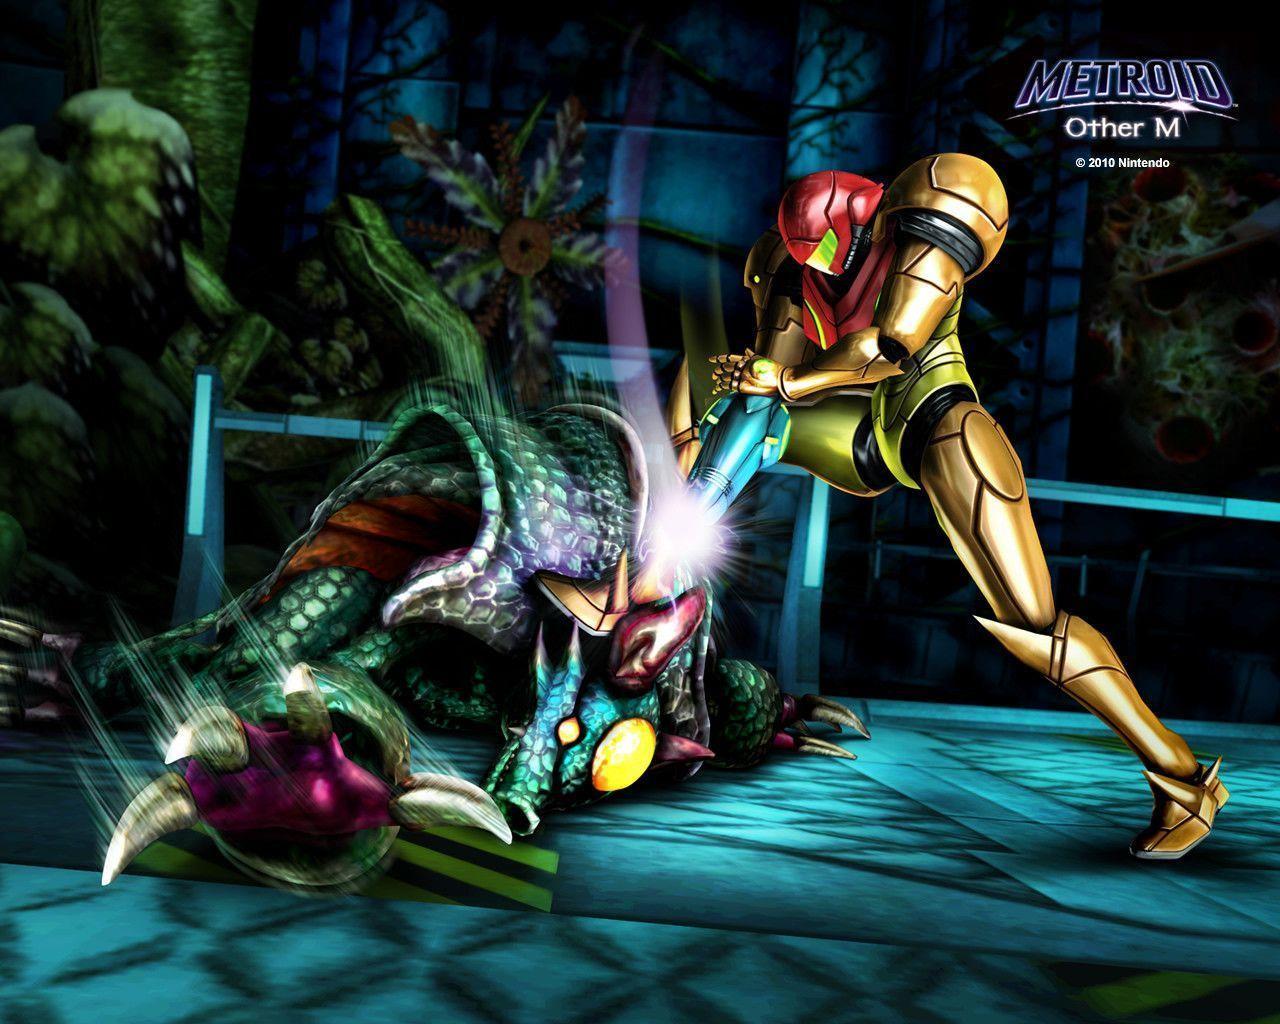 Wallpaper: Other M (Metroid Recon)